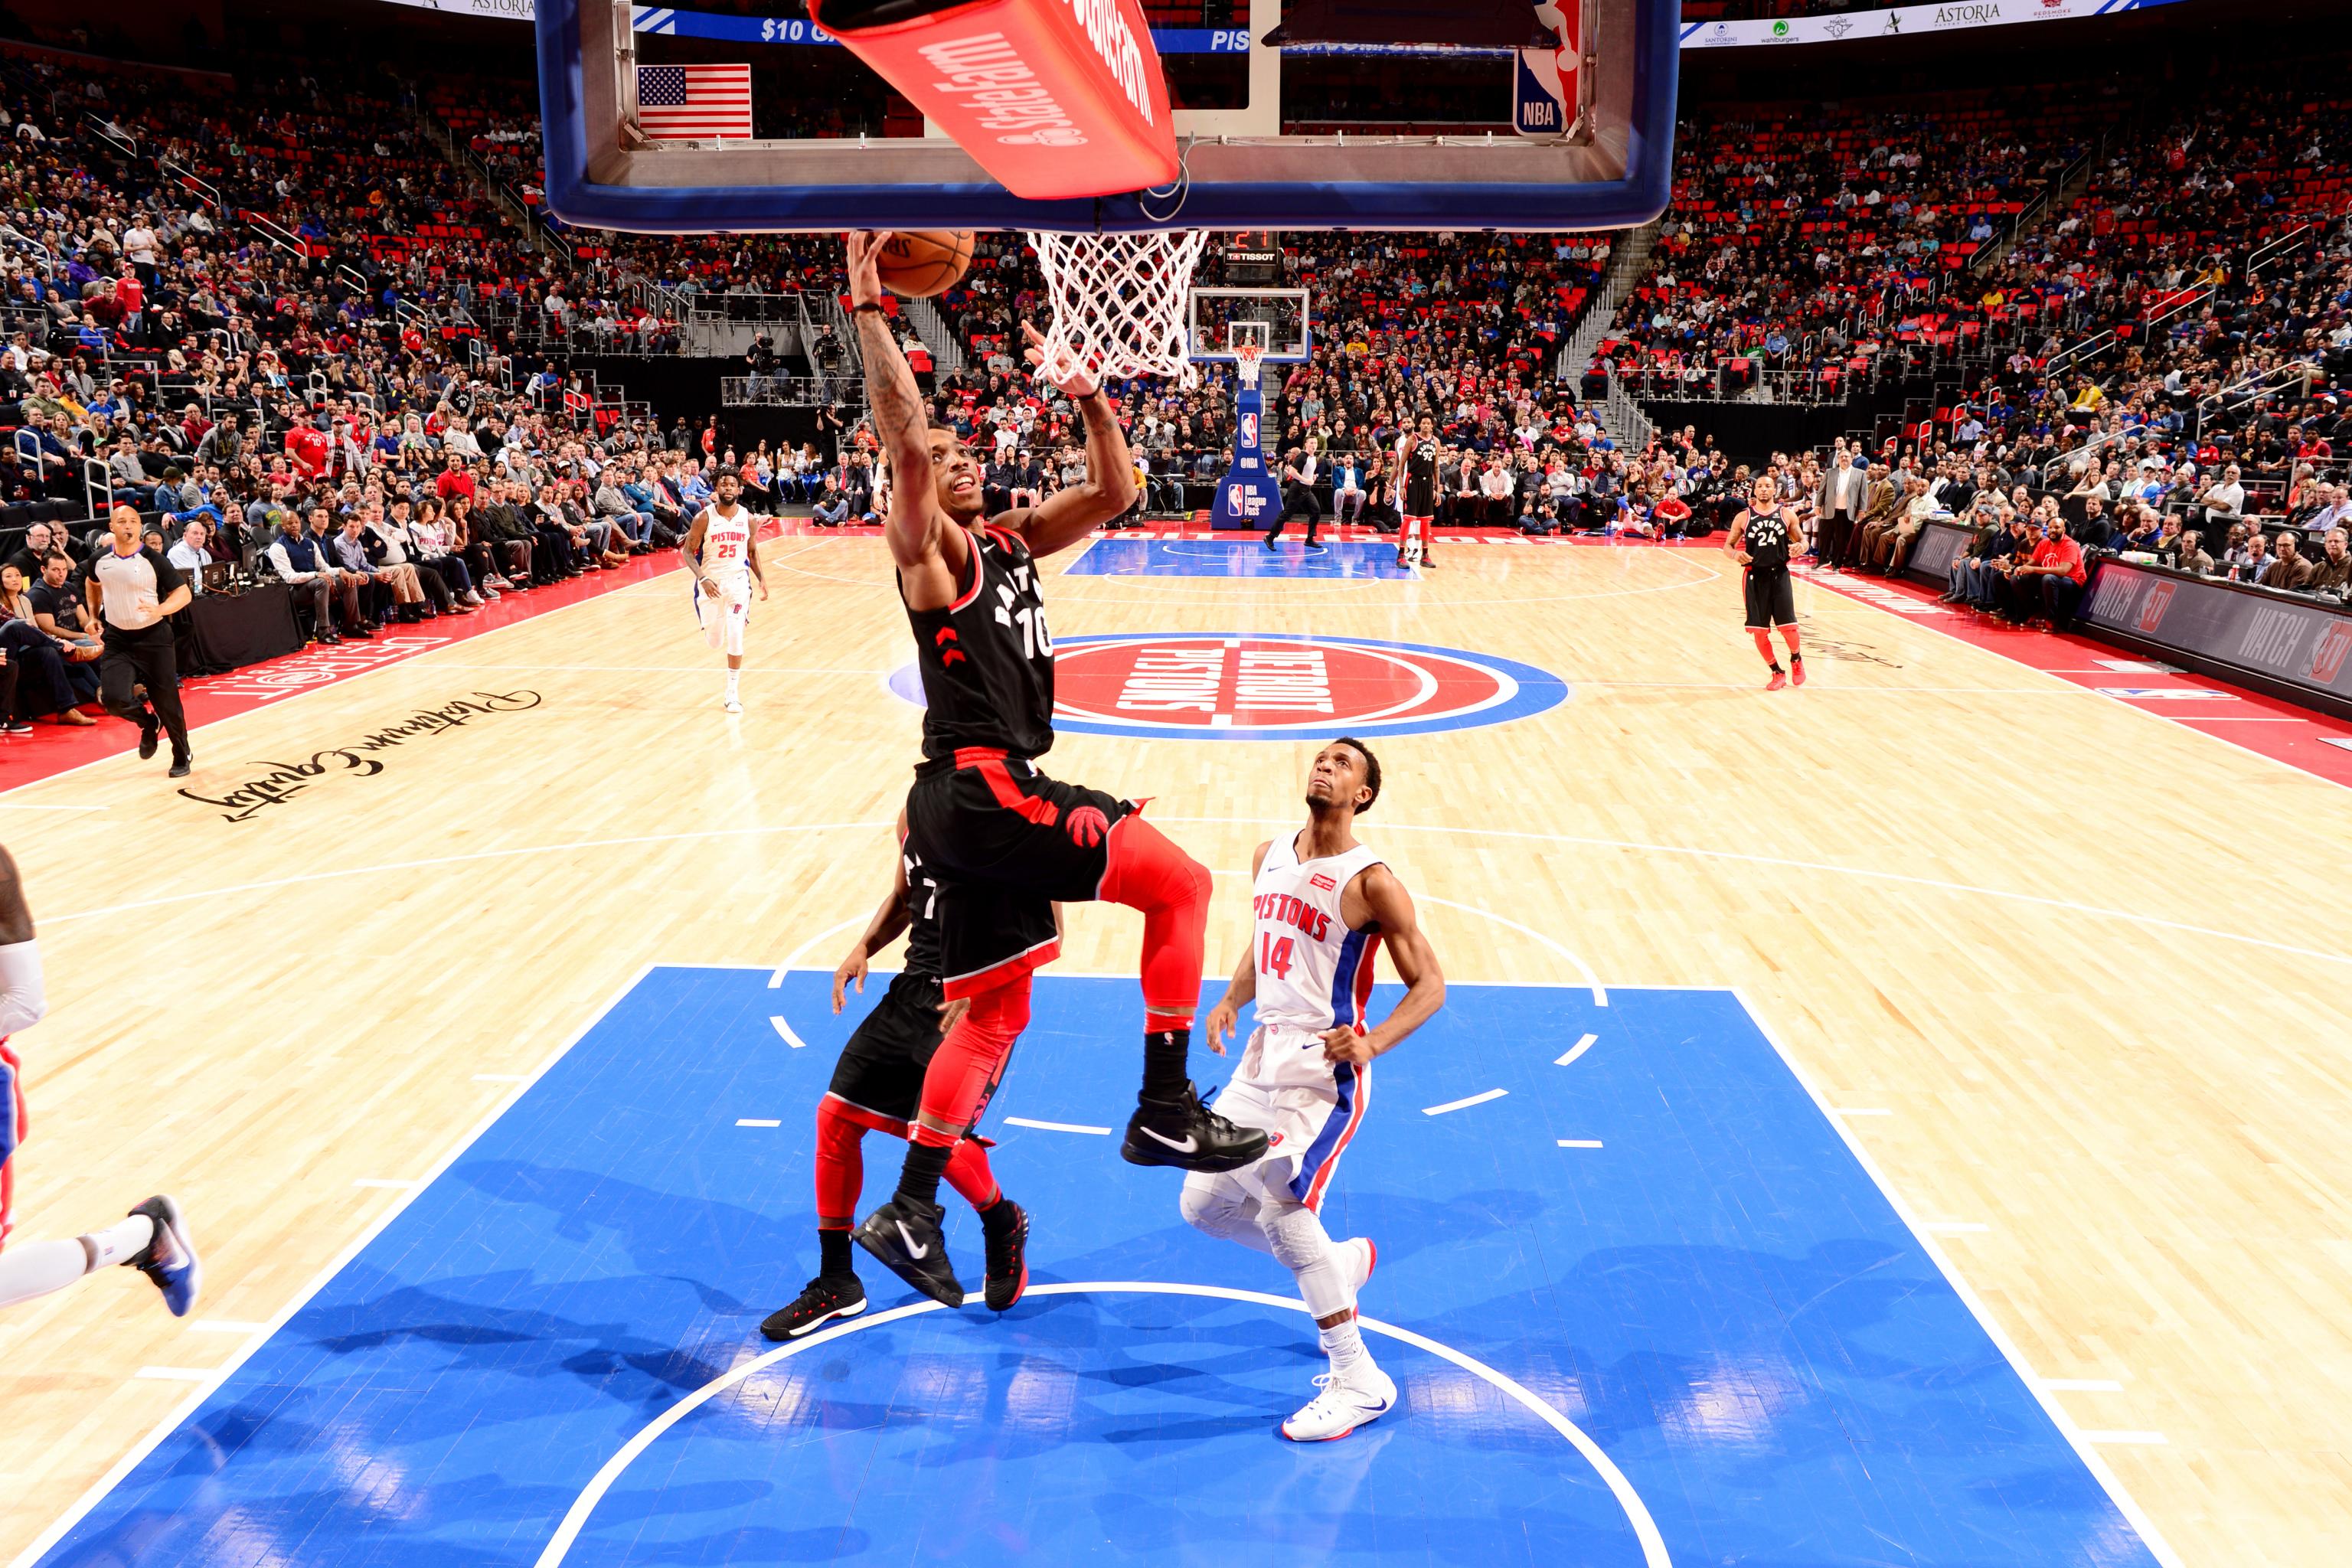 DeMar DeRozan Posterizes Pistons With Dramatic Dunk in Final Seconds